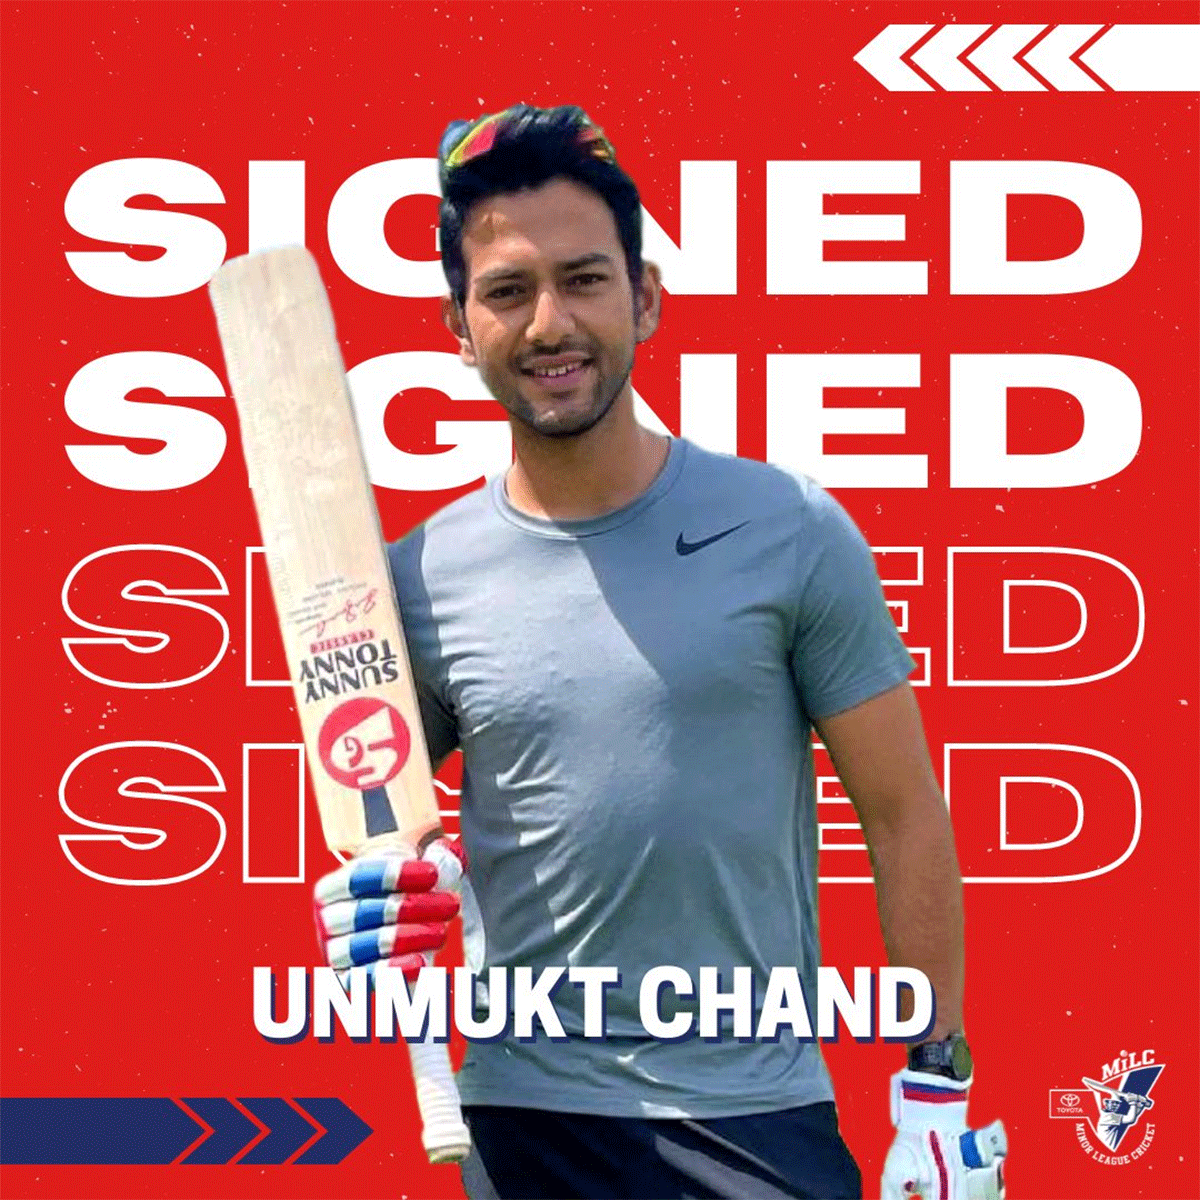 Unmukt Chand has relocated to the San Francisco Bay Area and signed a multi-year agreement with Major League Cricket to support the development of the game in the United States.